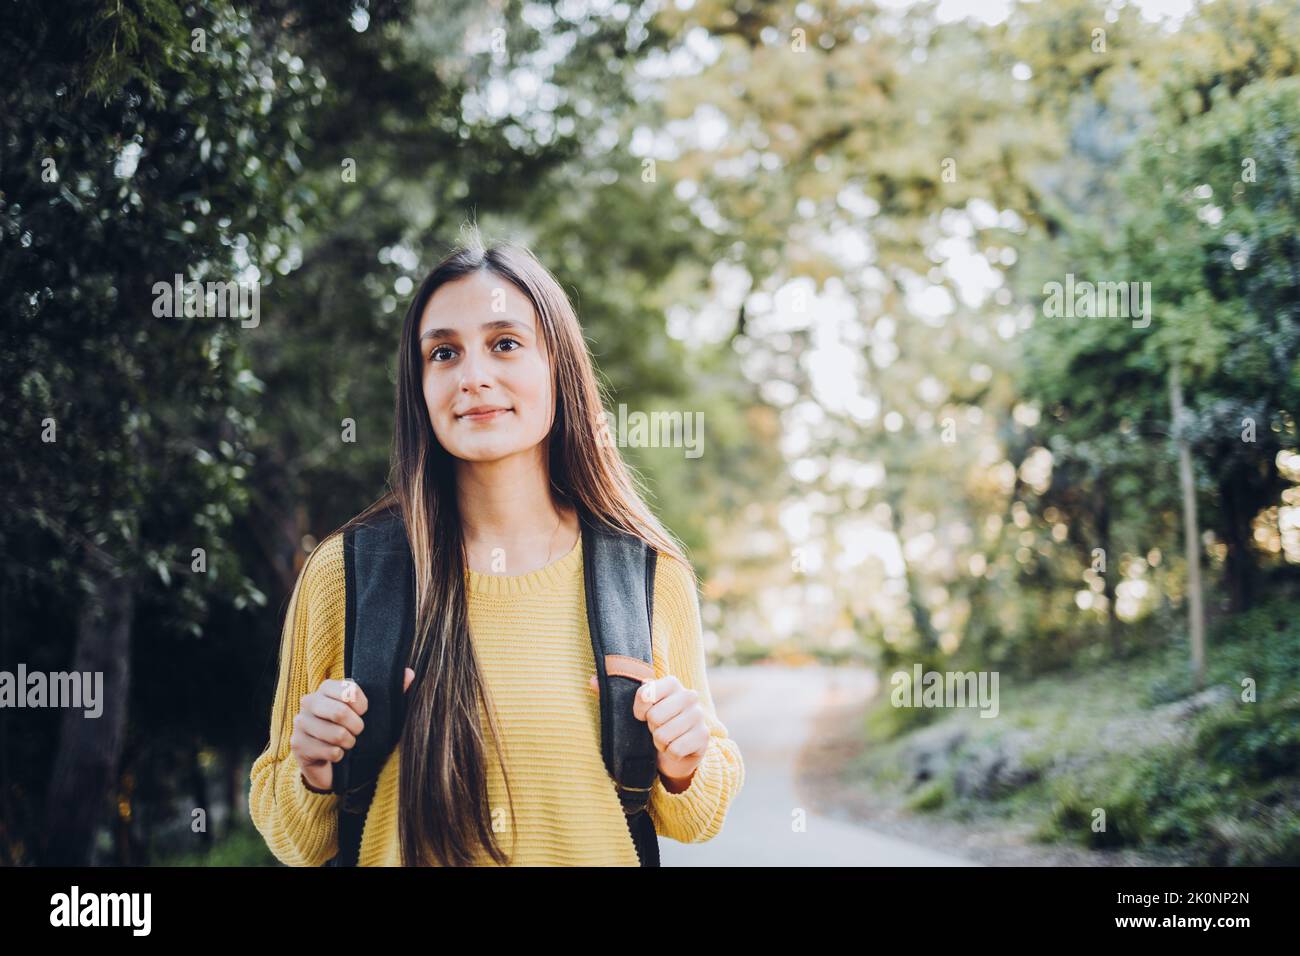 Smiling female university student wearing a yellow sweater and a backpack in the campus park road. Stock Photo